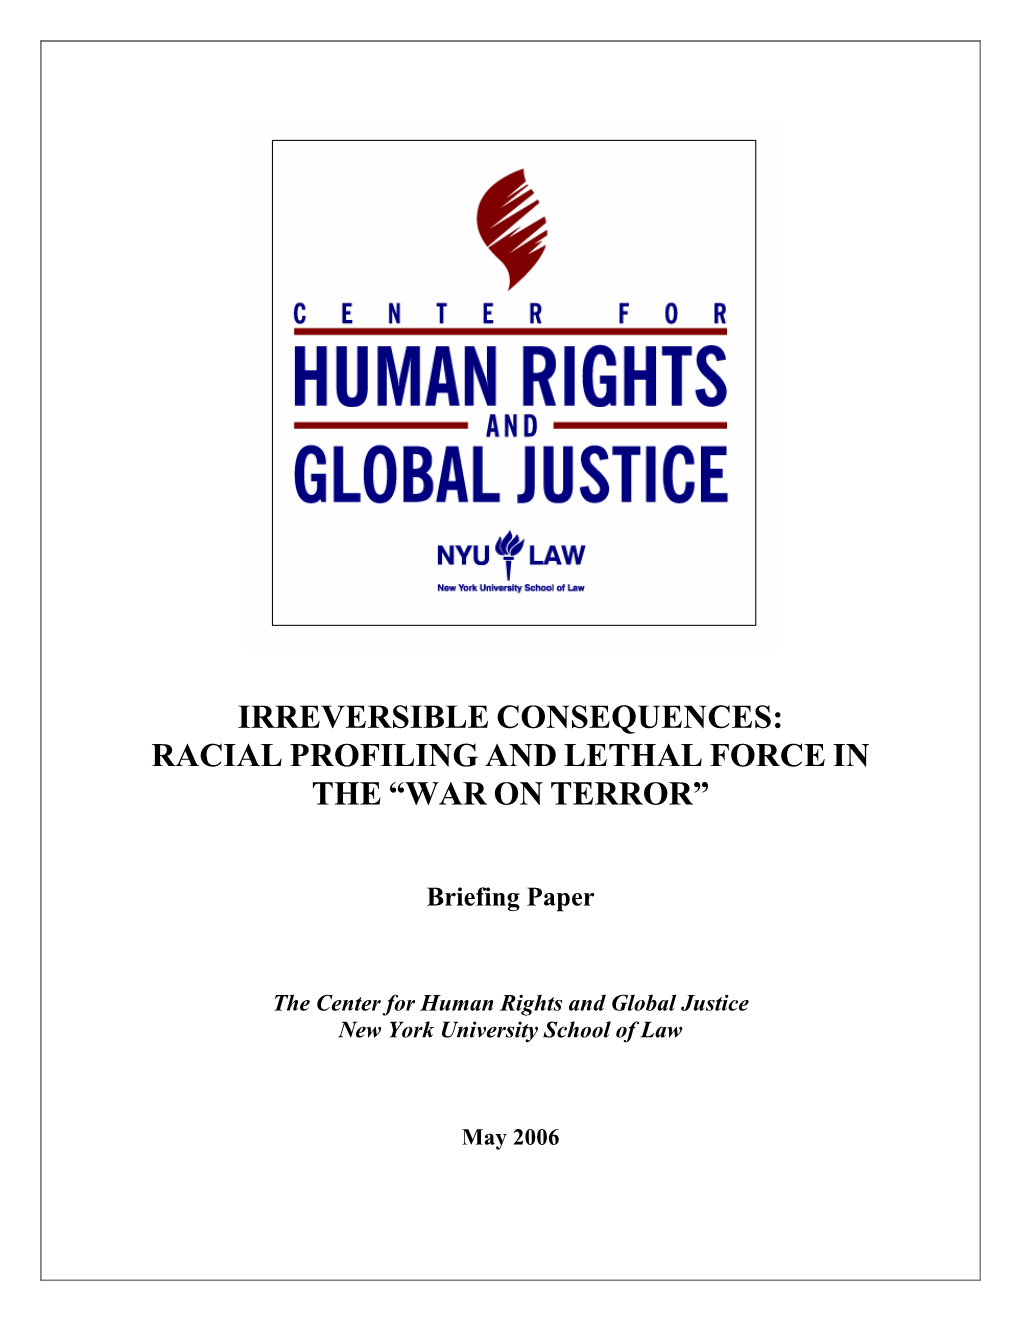 Irreversible Consequences: Racial Profiling and Lethal Force in the “War on Terror”